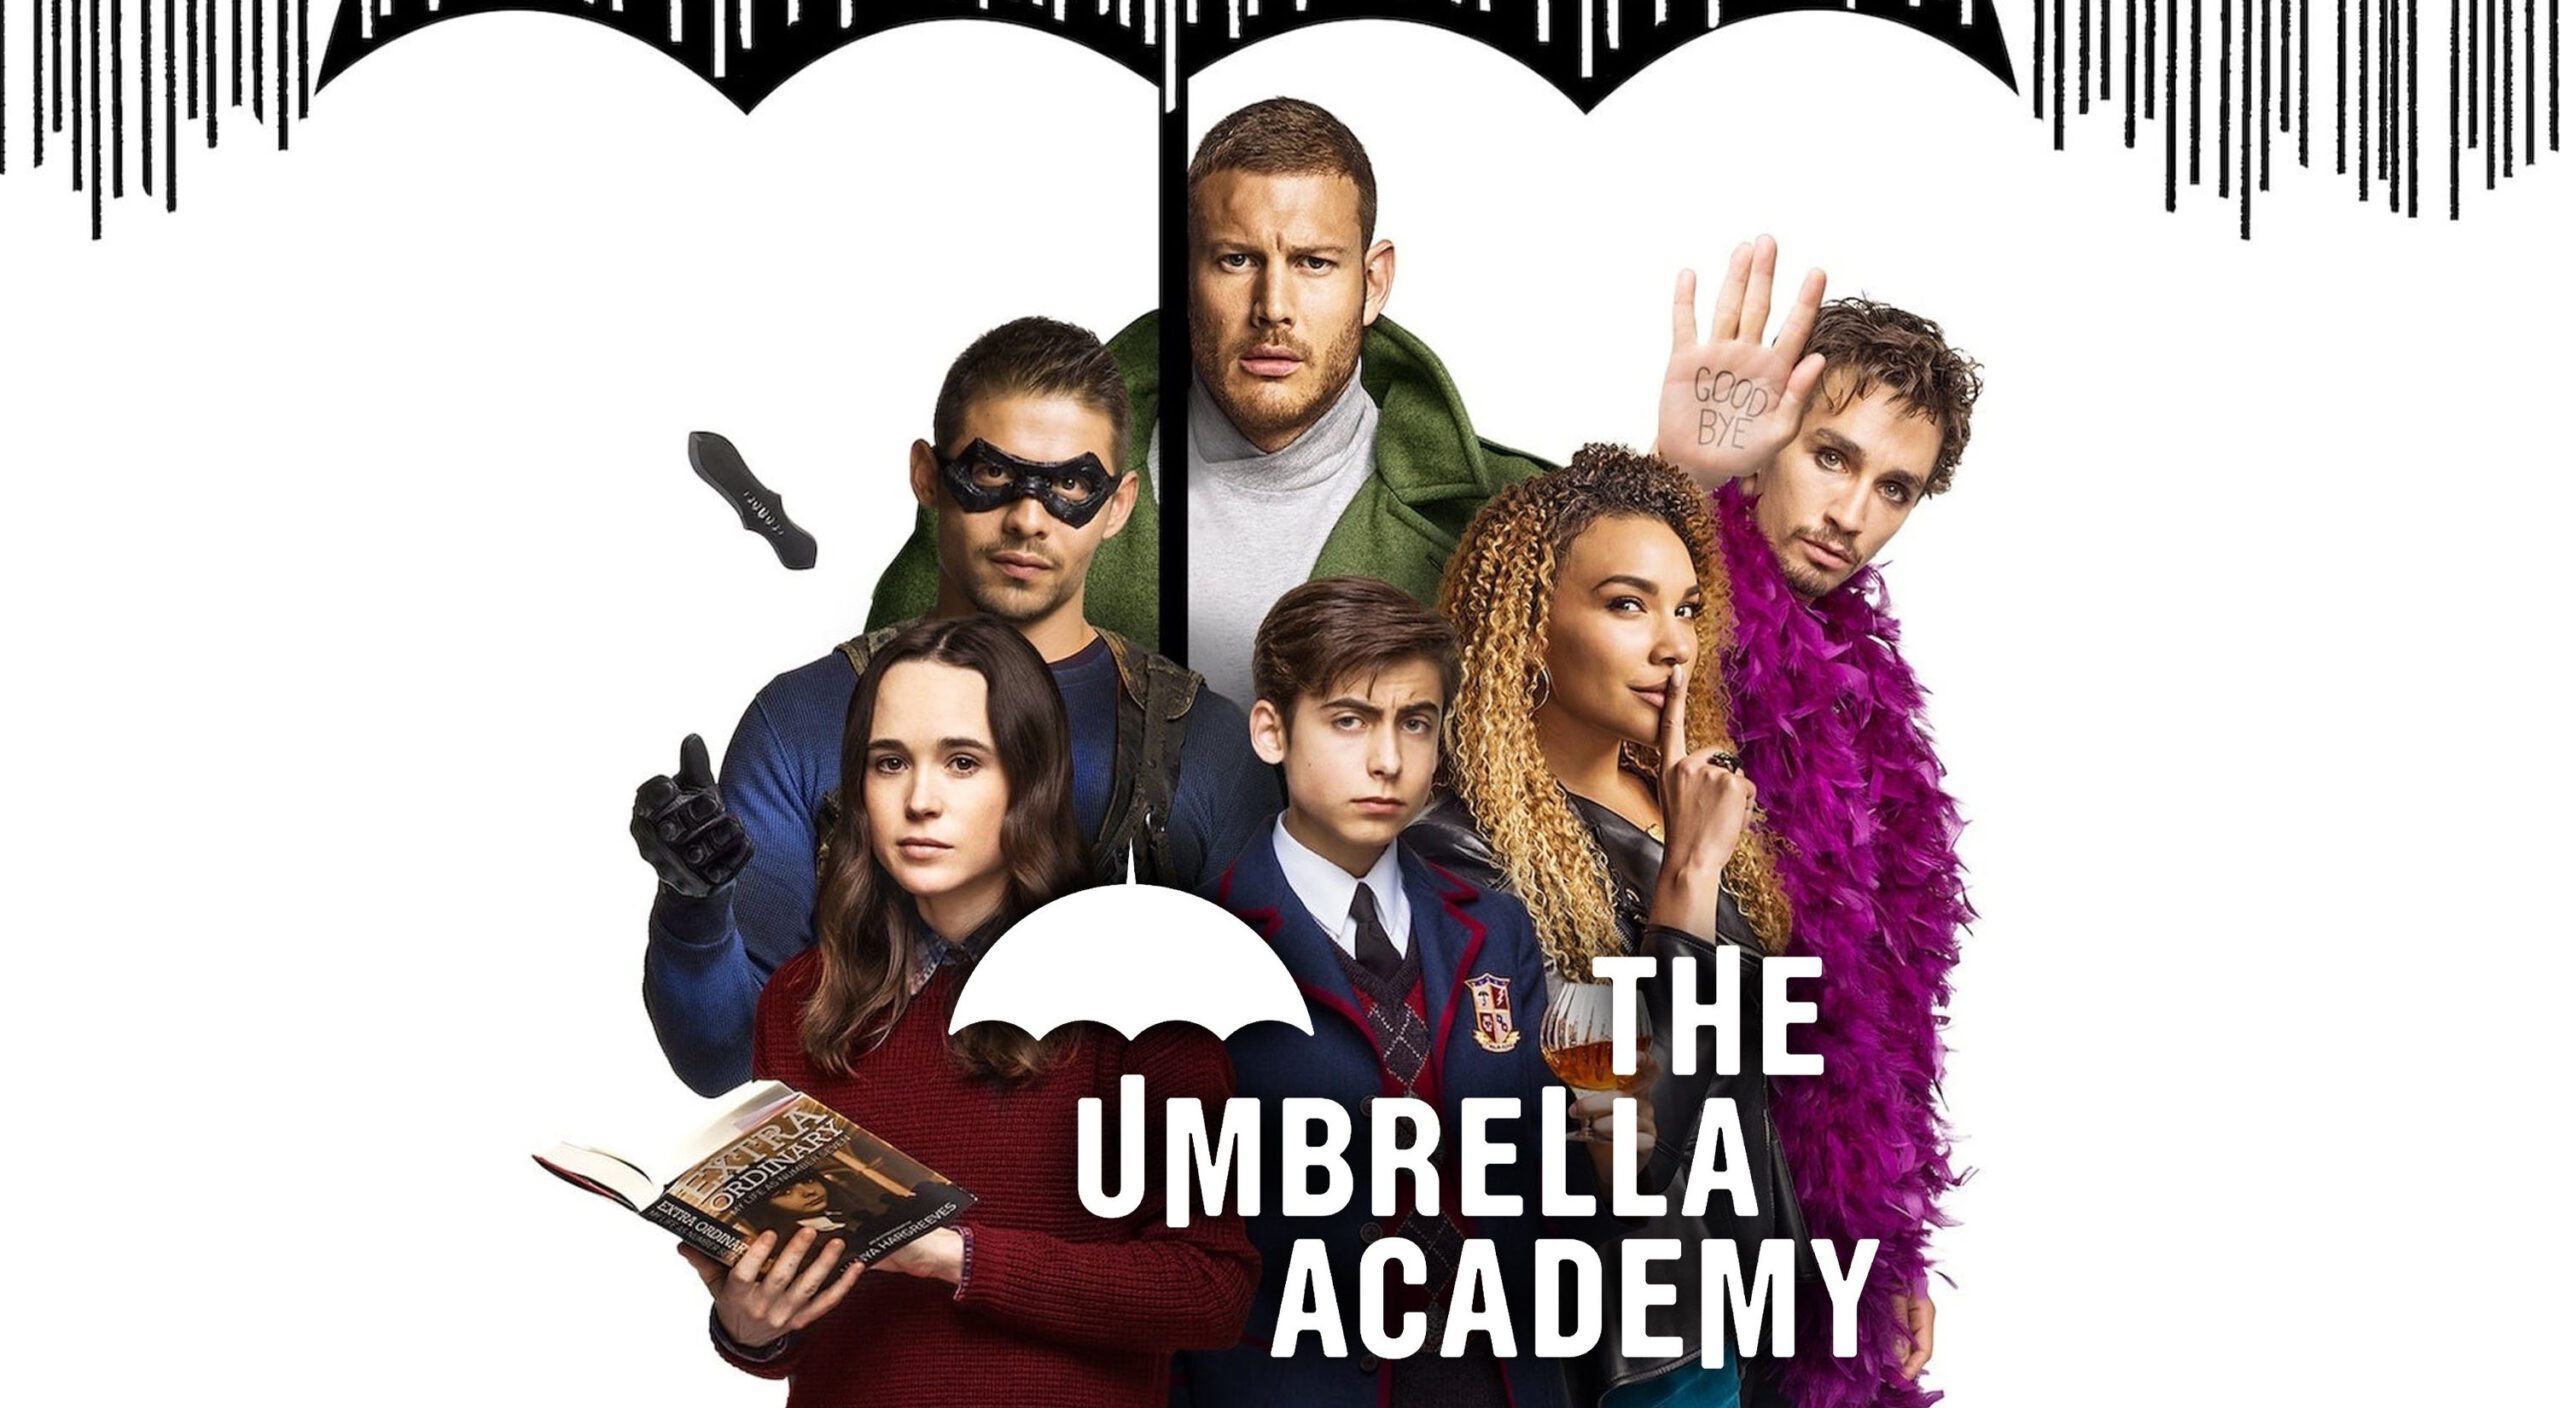 Will 'The Umbrella Academy' season 4 show another twisted timeline?